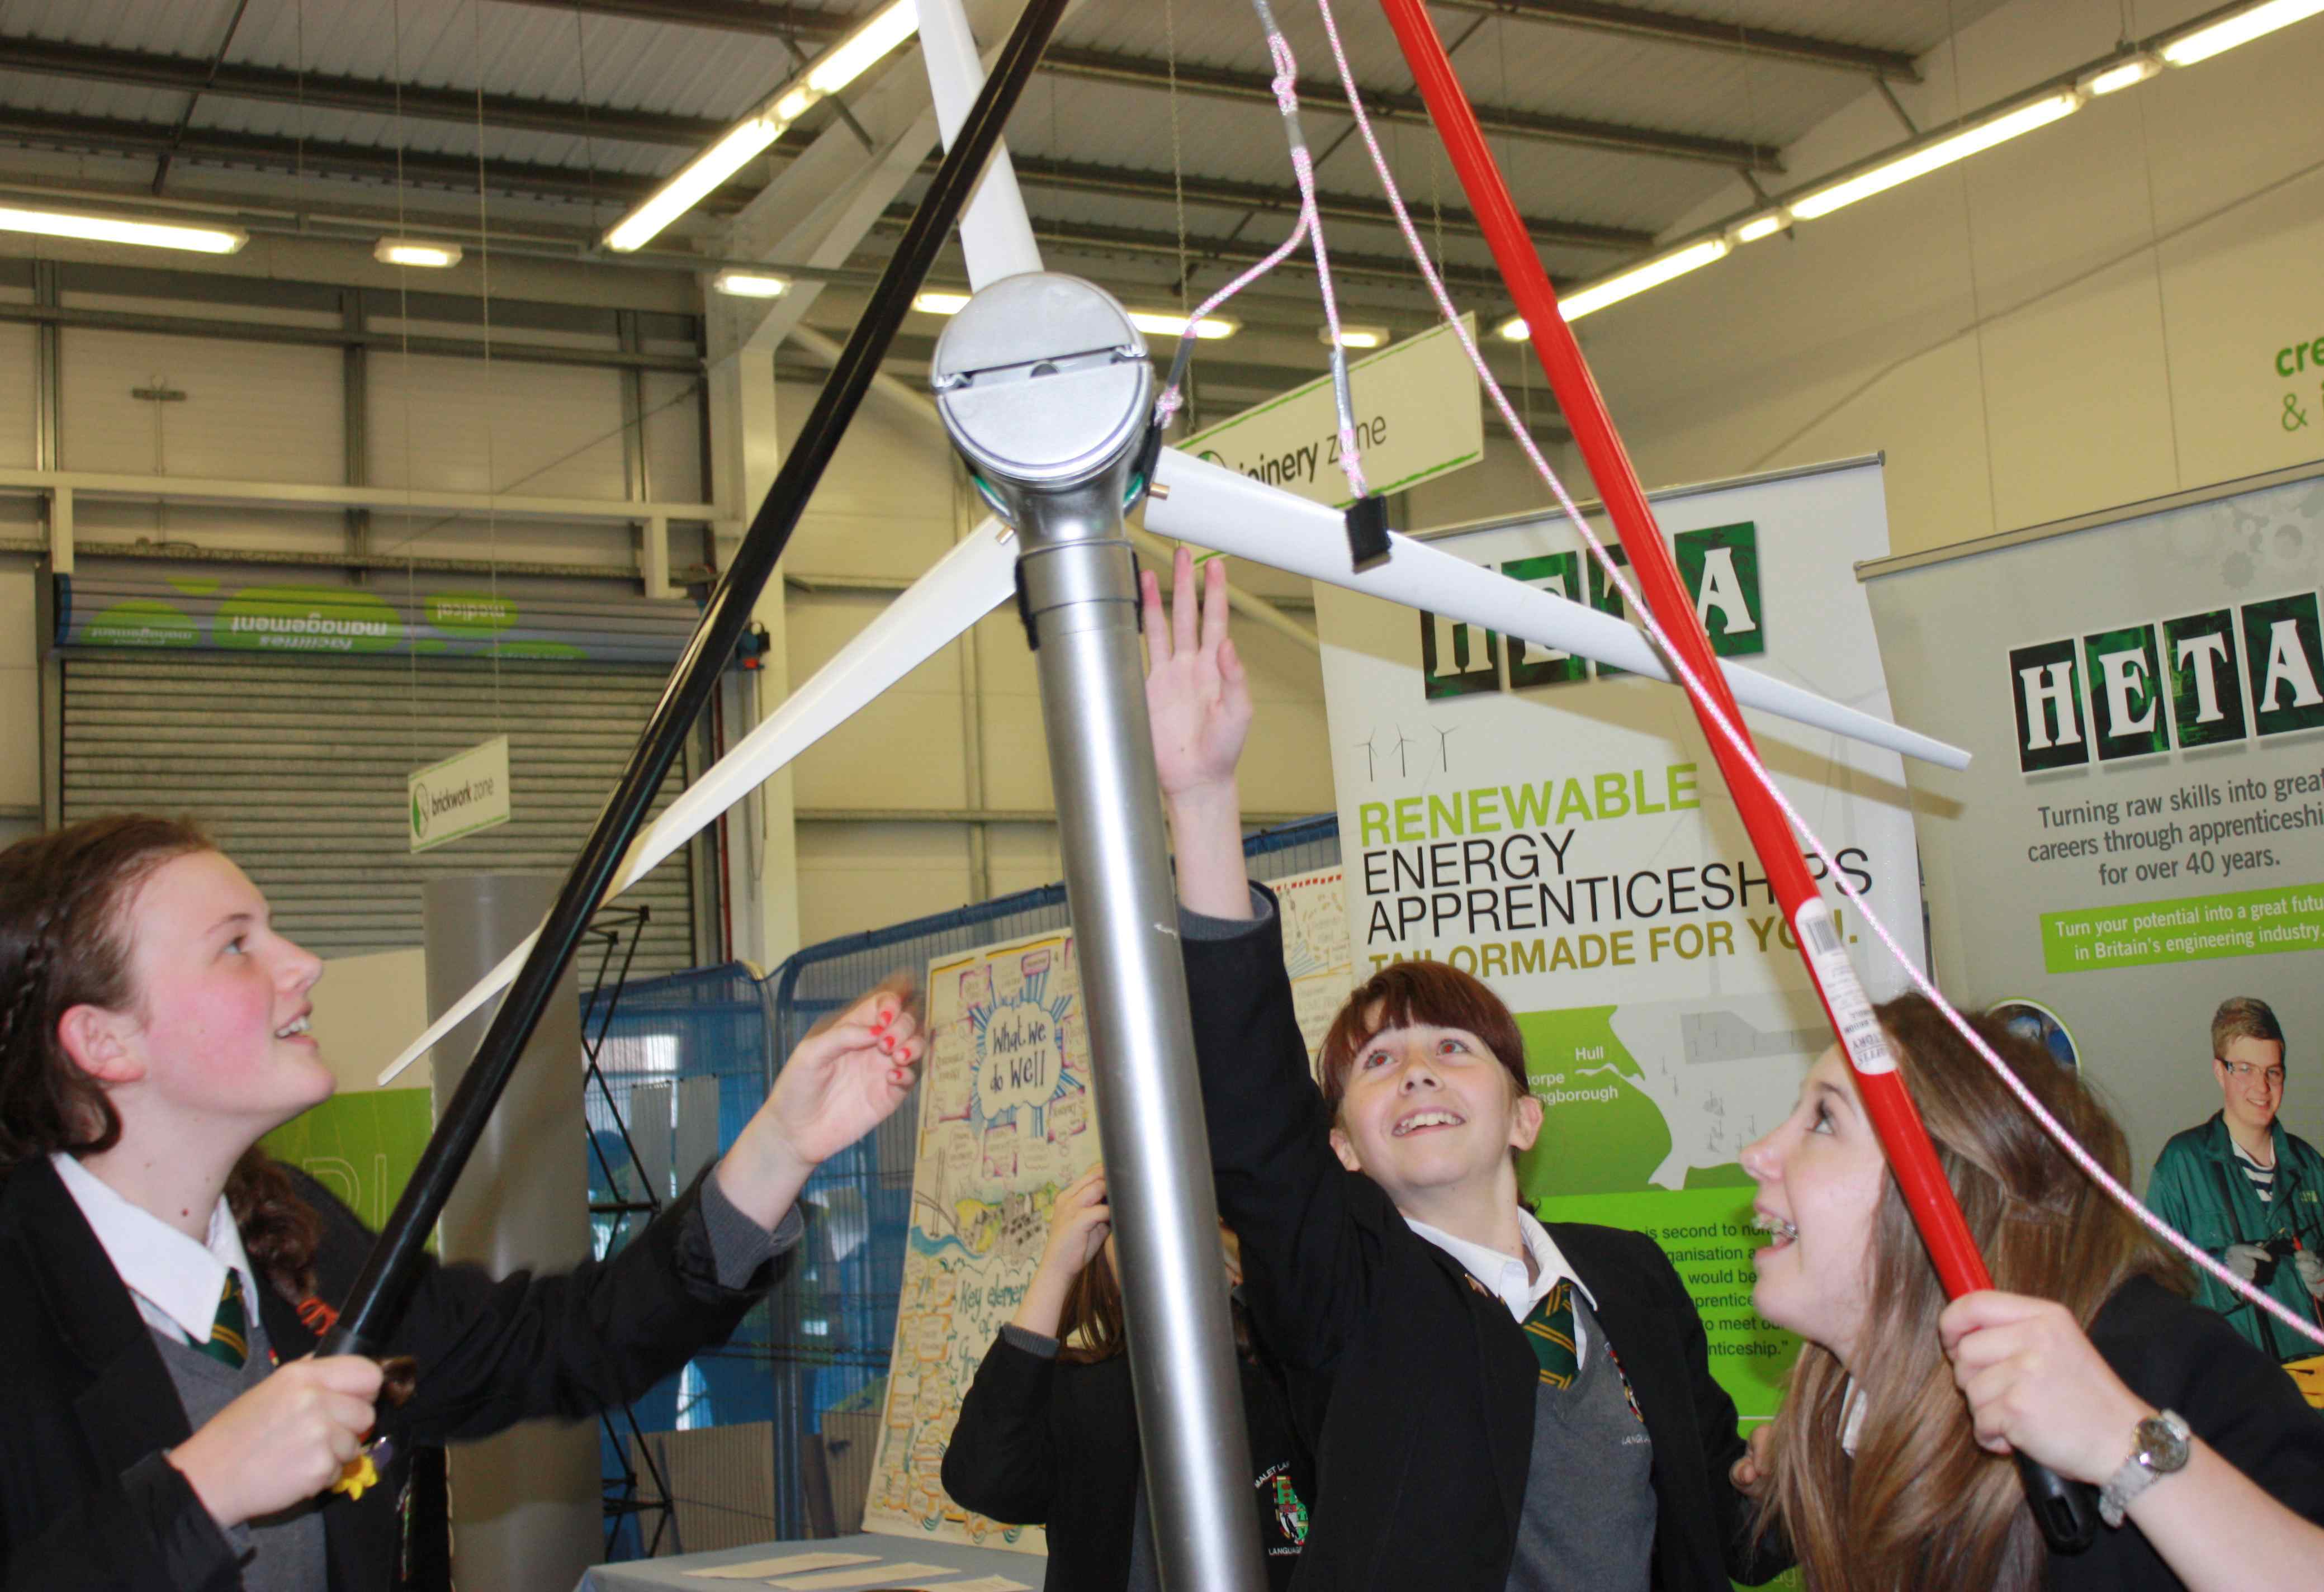 UK: 'Champions for Wind' Highlights Offshore Wind Job Opportunities